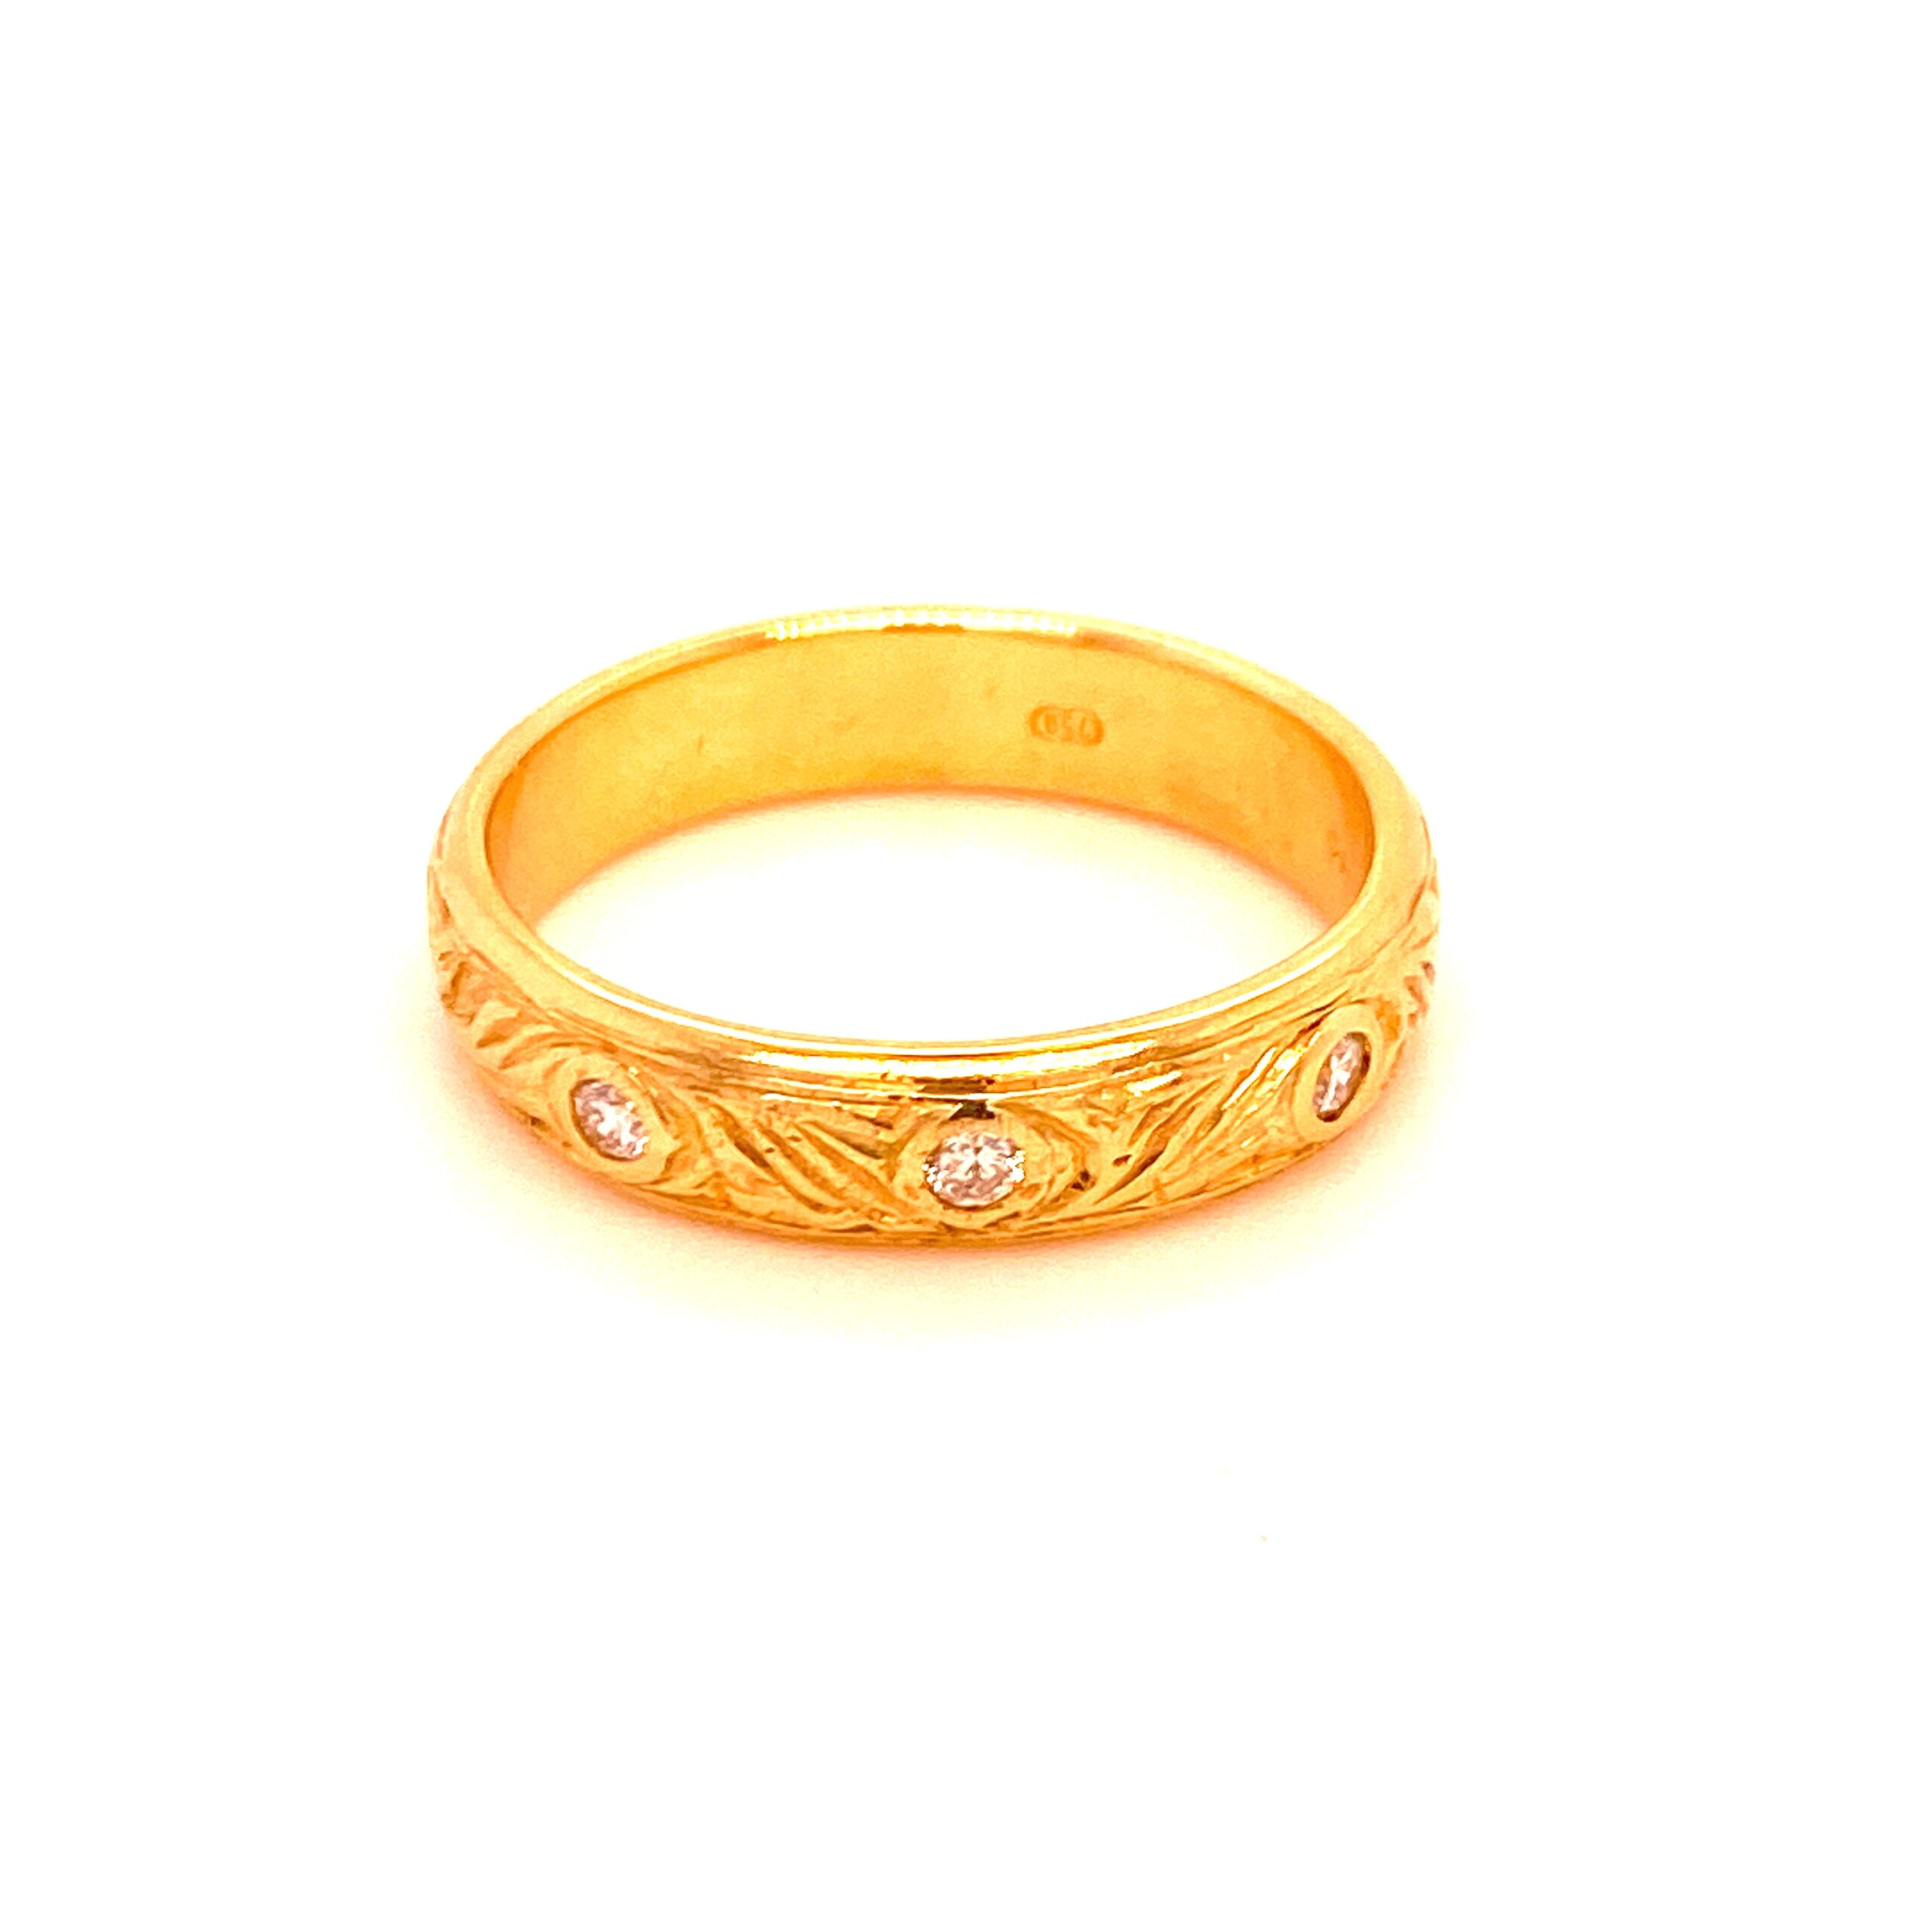 Wide engraved antique inspired gold band with diamonds